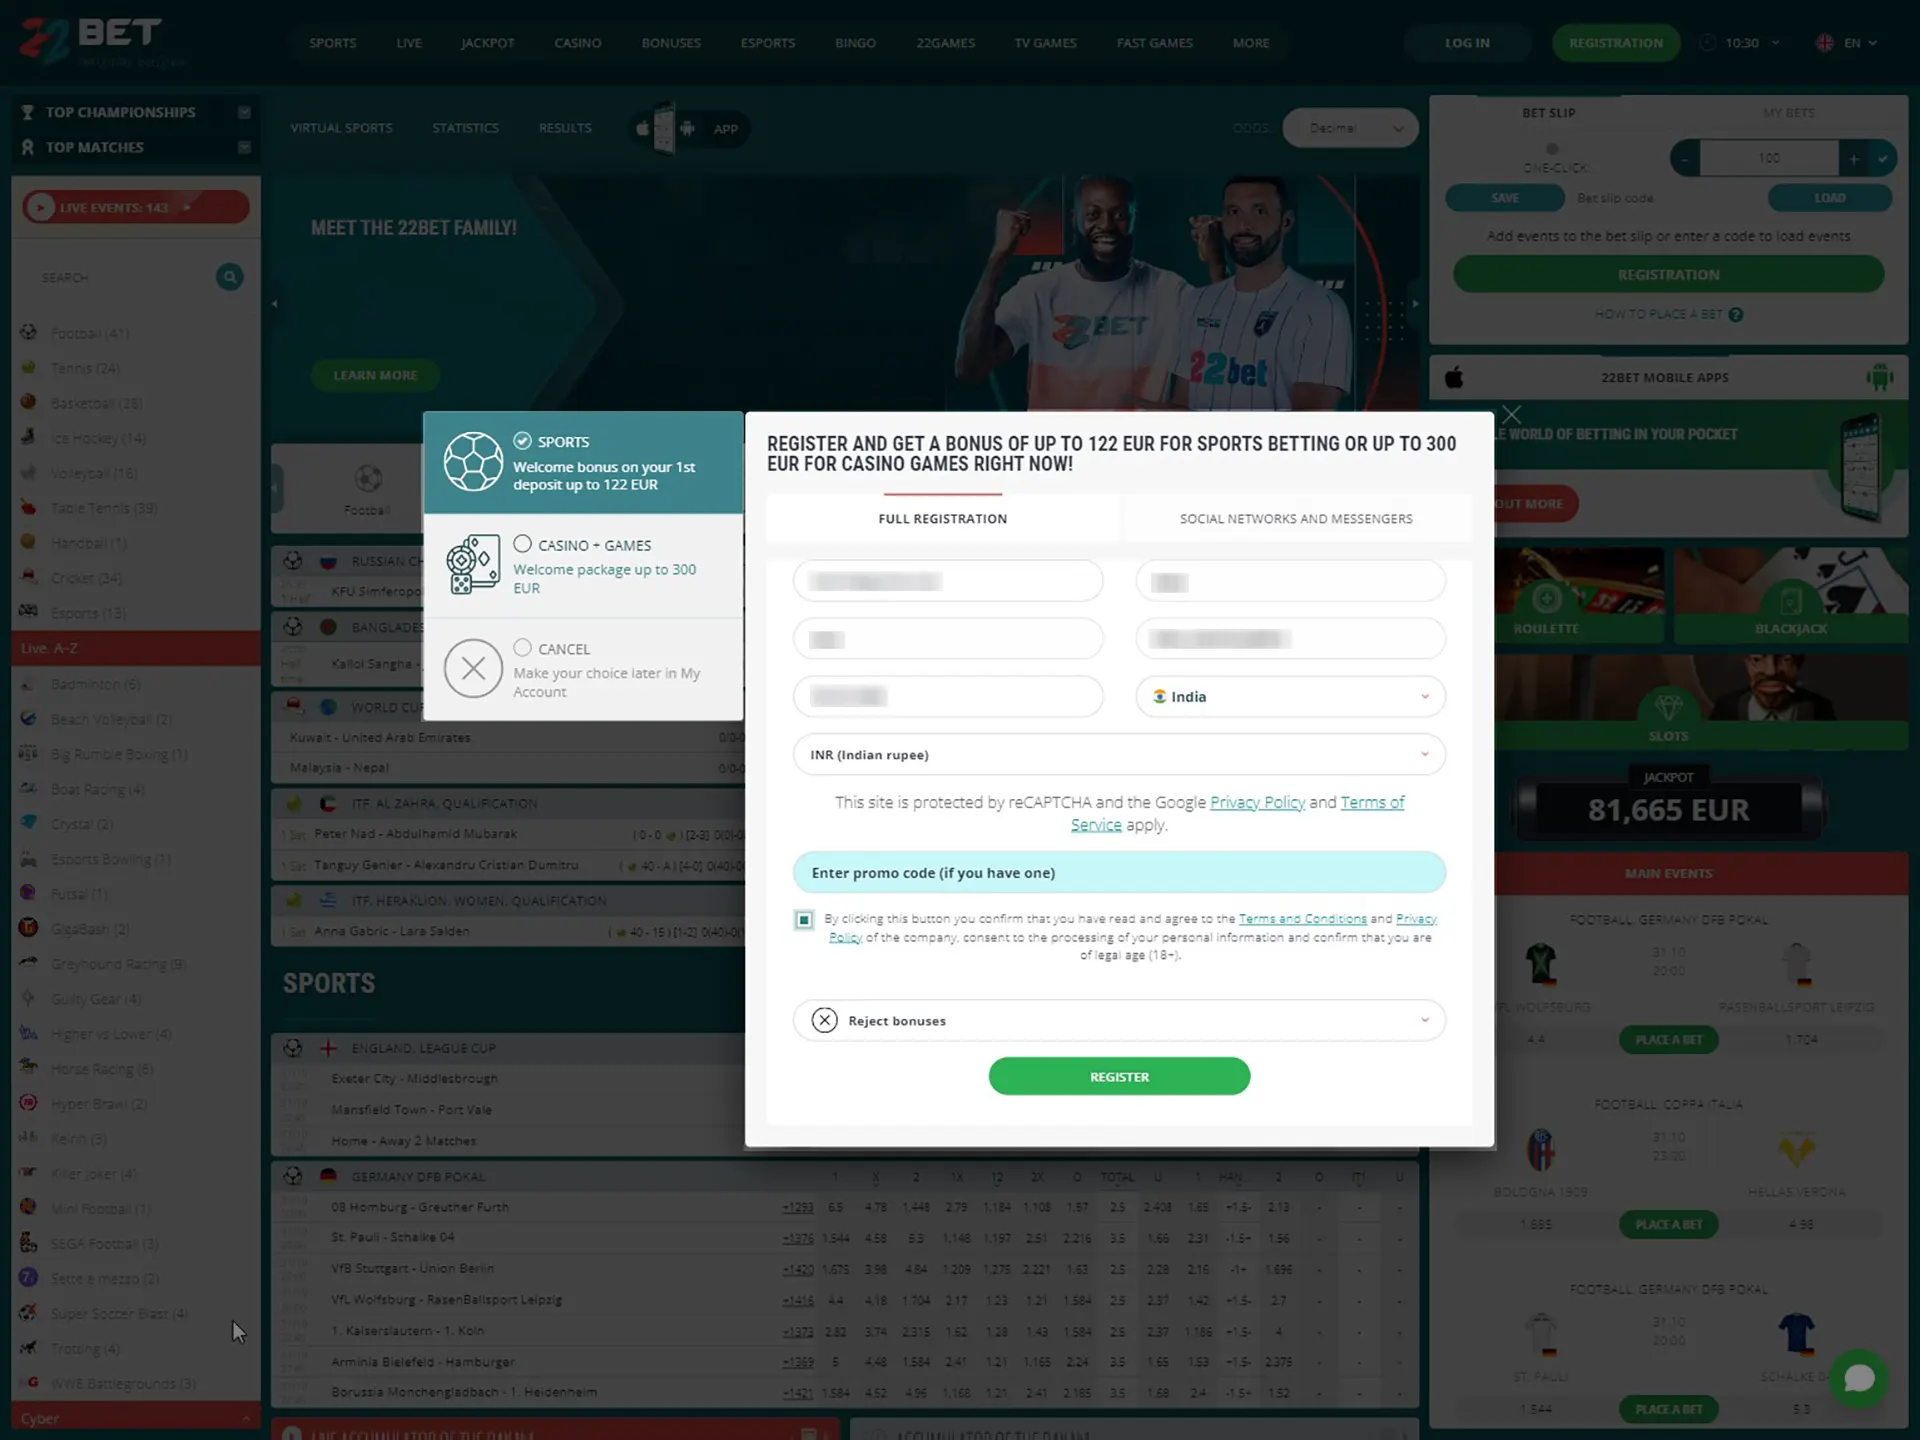 Fill out the registration form on the 22Bet website.